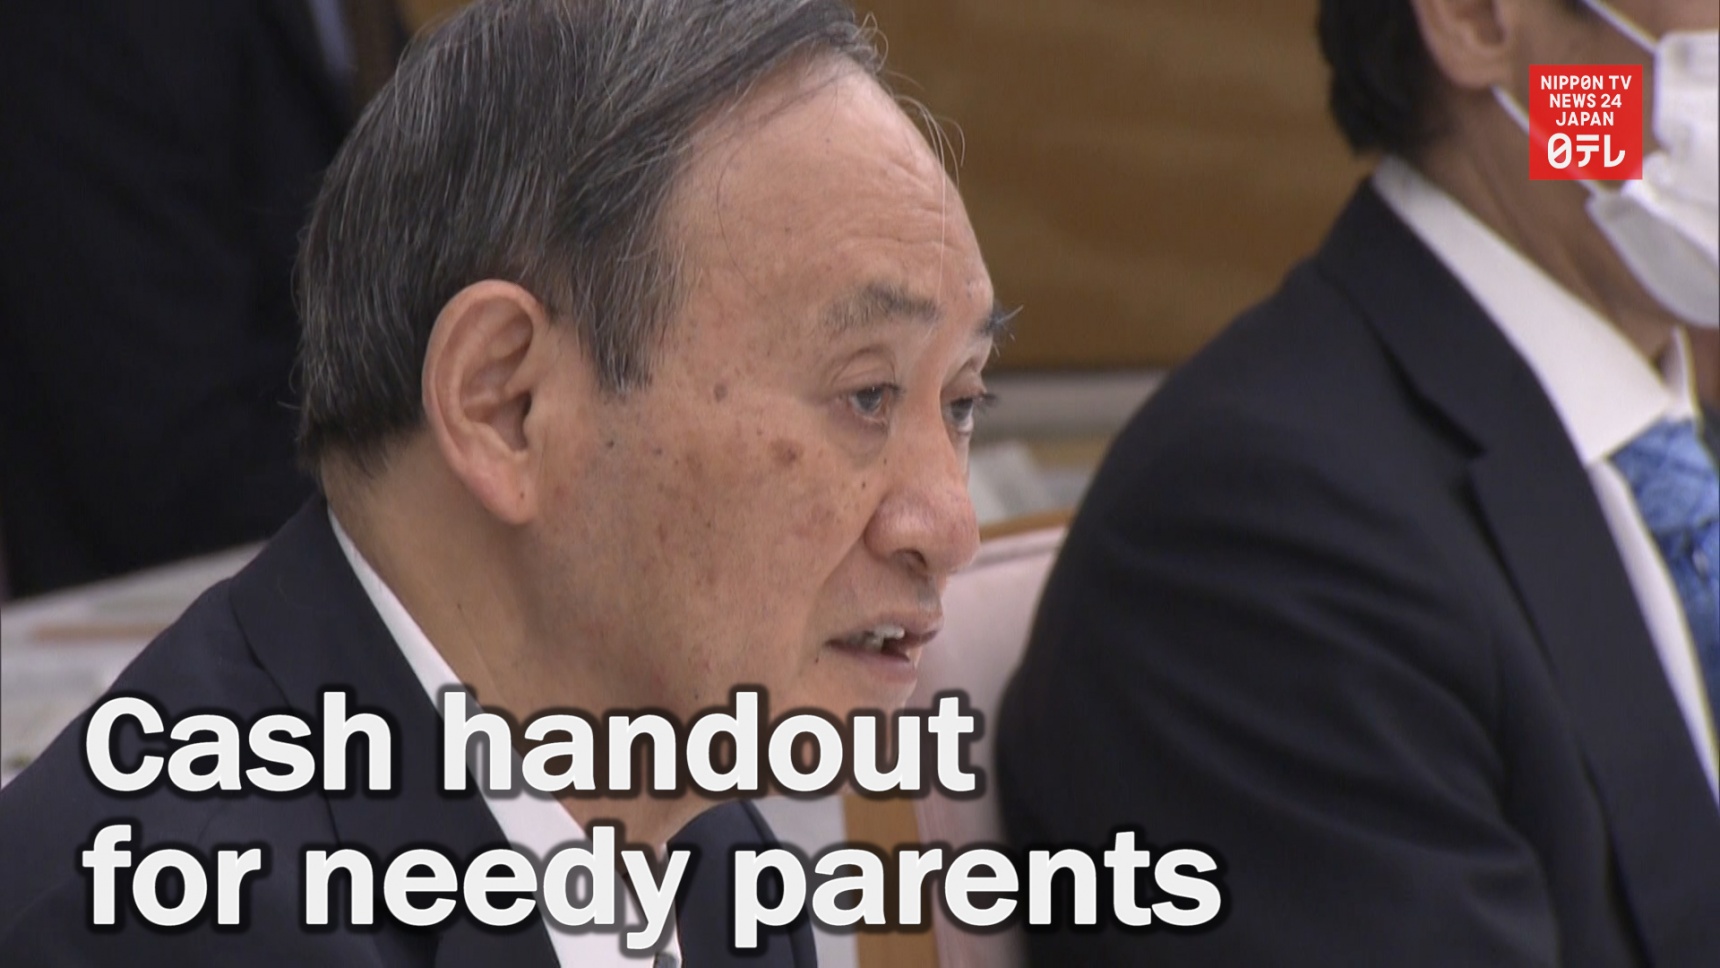 Japan to Provide ¥50,000 Handout to Parents